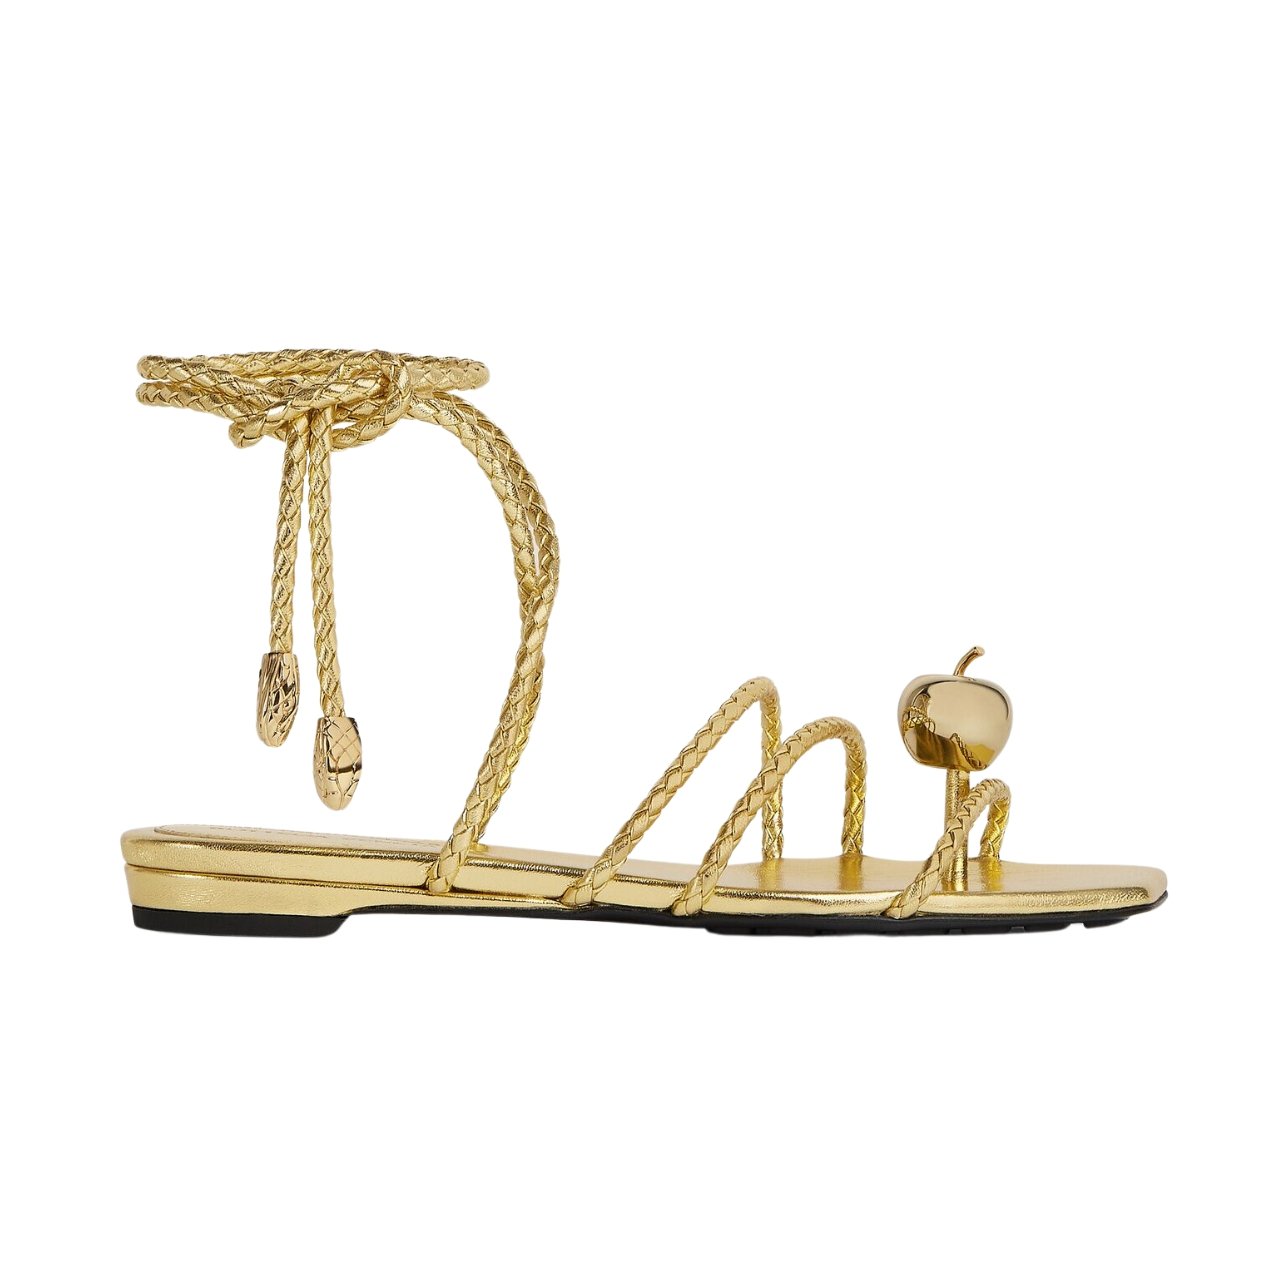 The apple of our eye? It’s on a dazzling statement sandal like Bottega Veneta’s Adam flat sandals, which feature laminated lambskin with coaxial laces, snakehead embellishments and a gold apple at the toe. A sandal like this will have you putting your best foot forward no matter the activity.